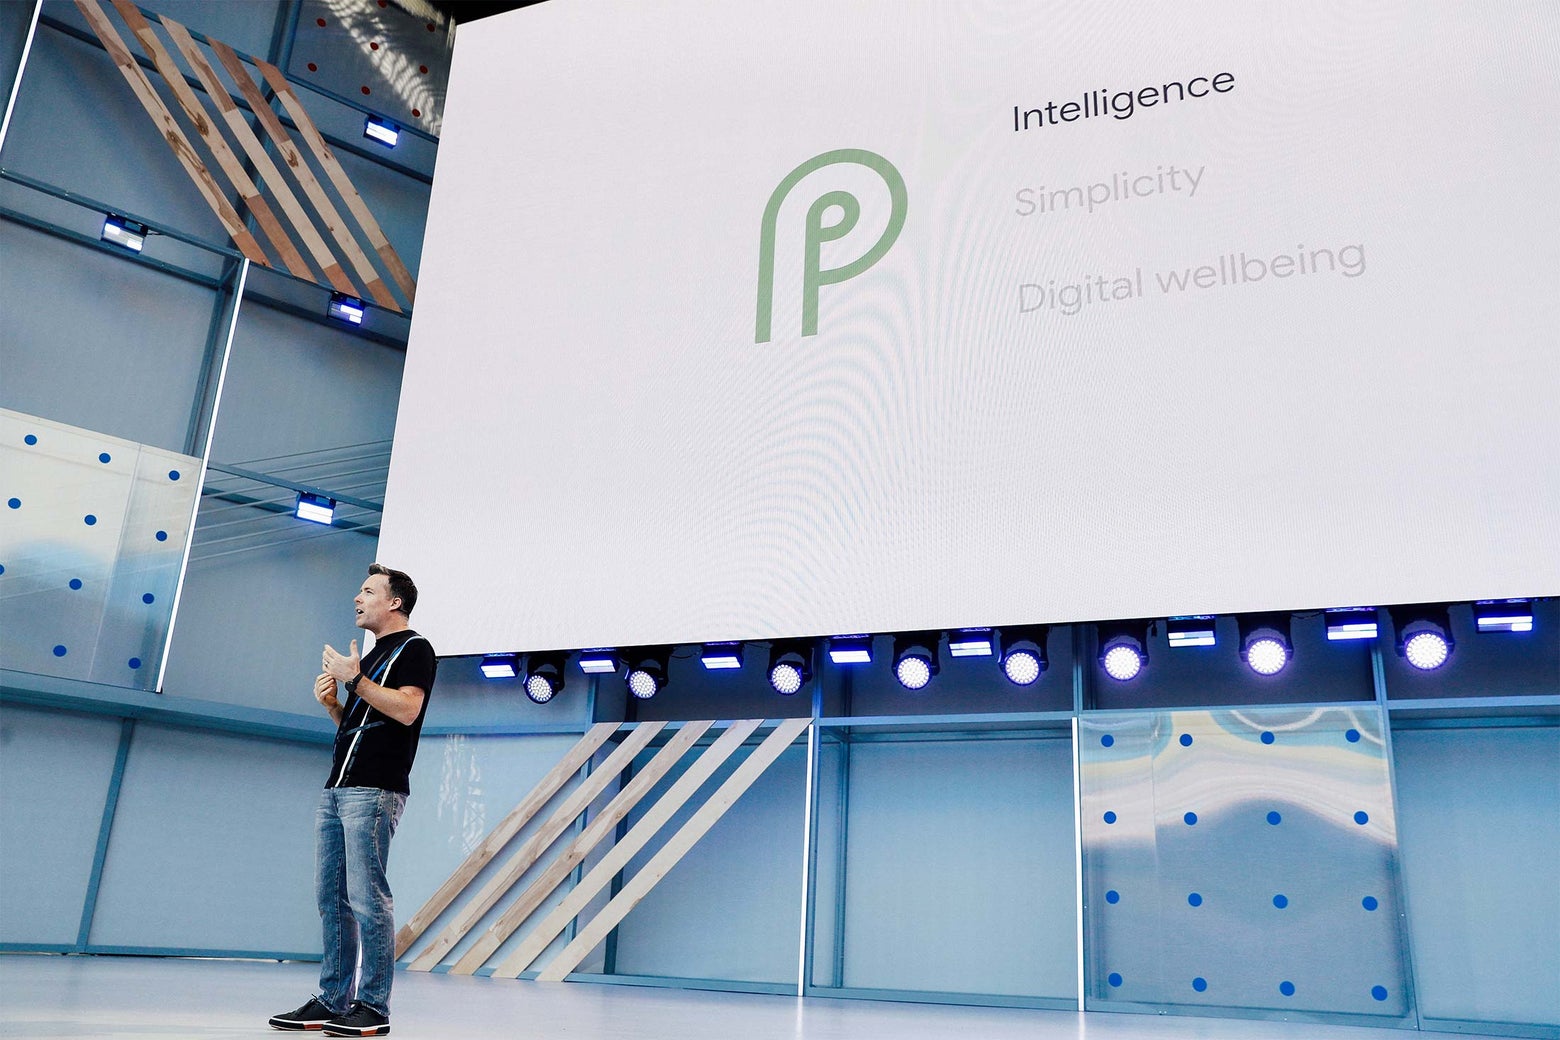 Android P update learns how you actually use your phone.